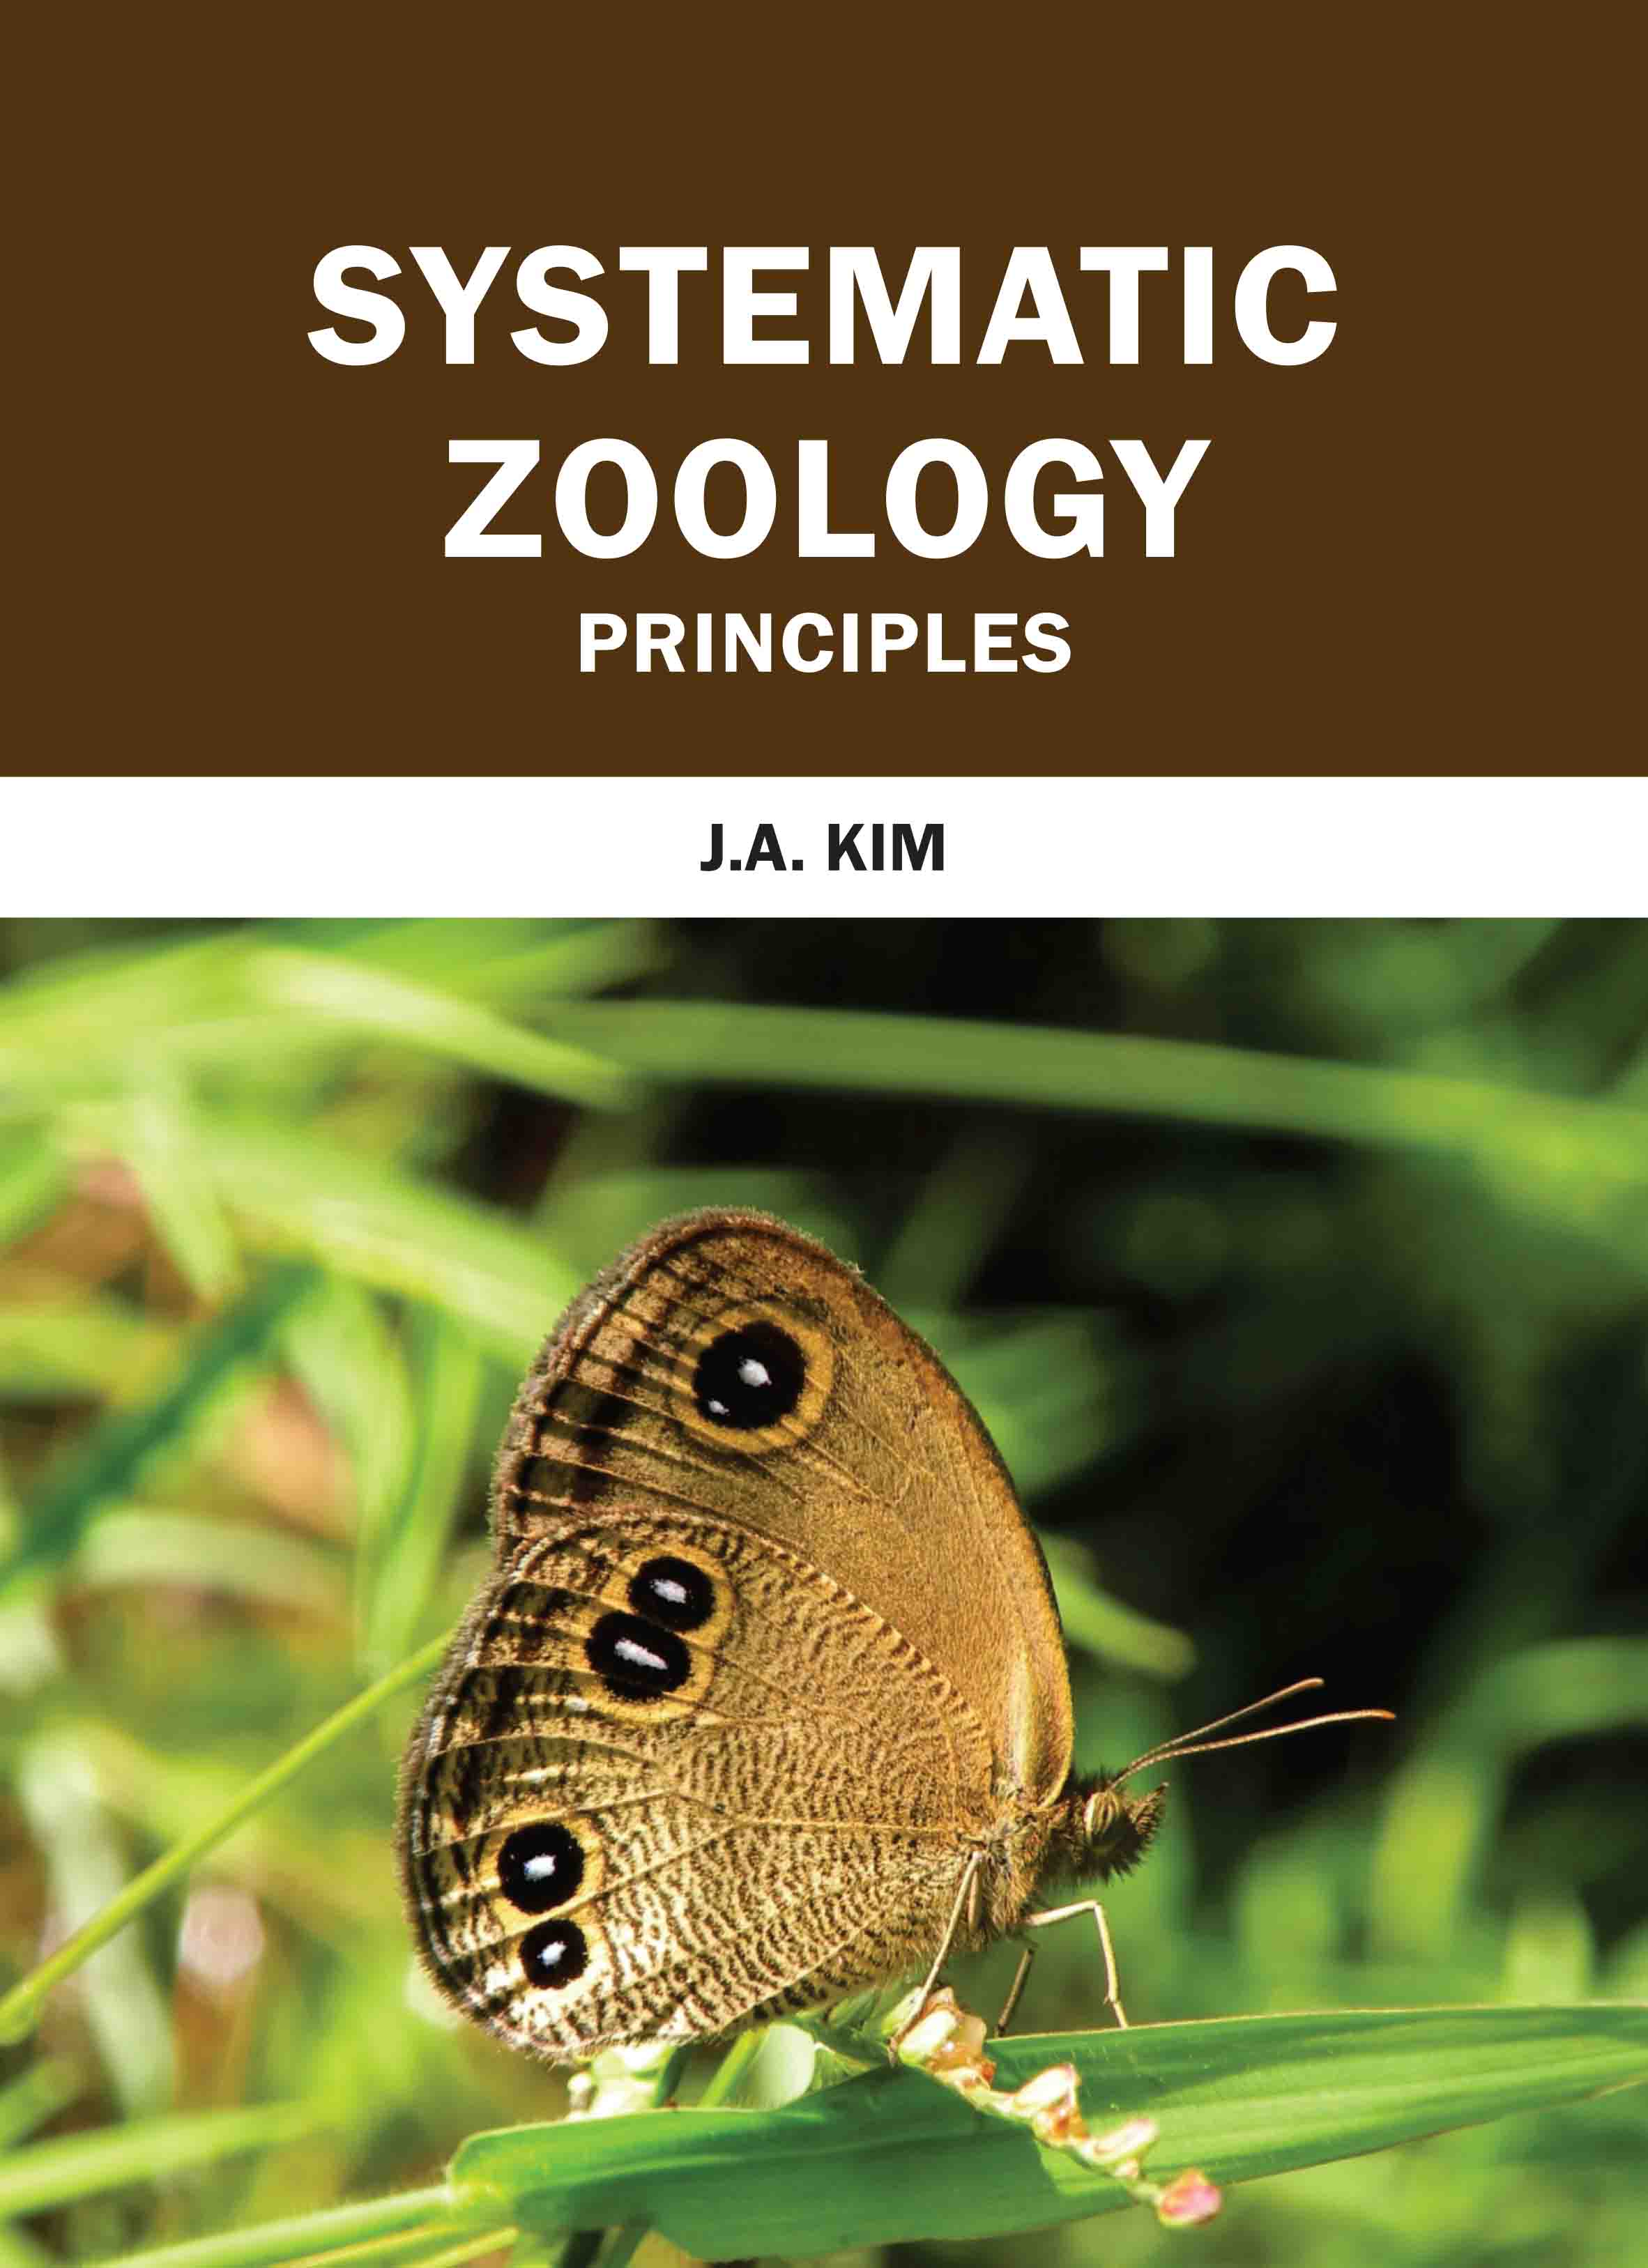 Systematic Zoology: Principles